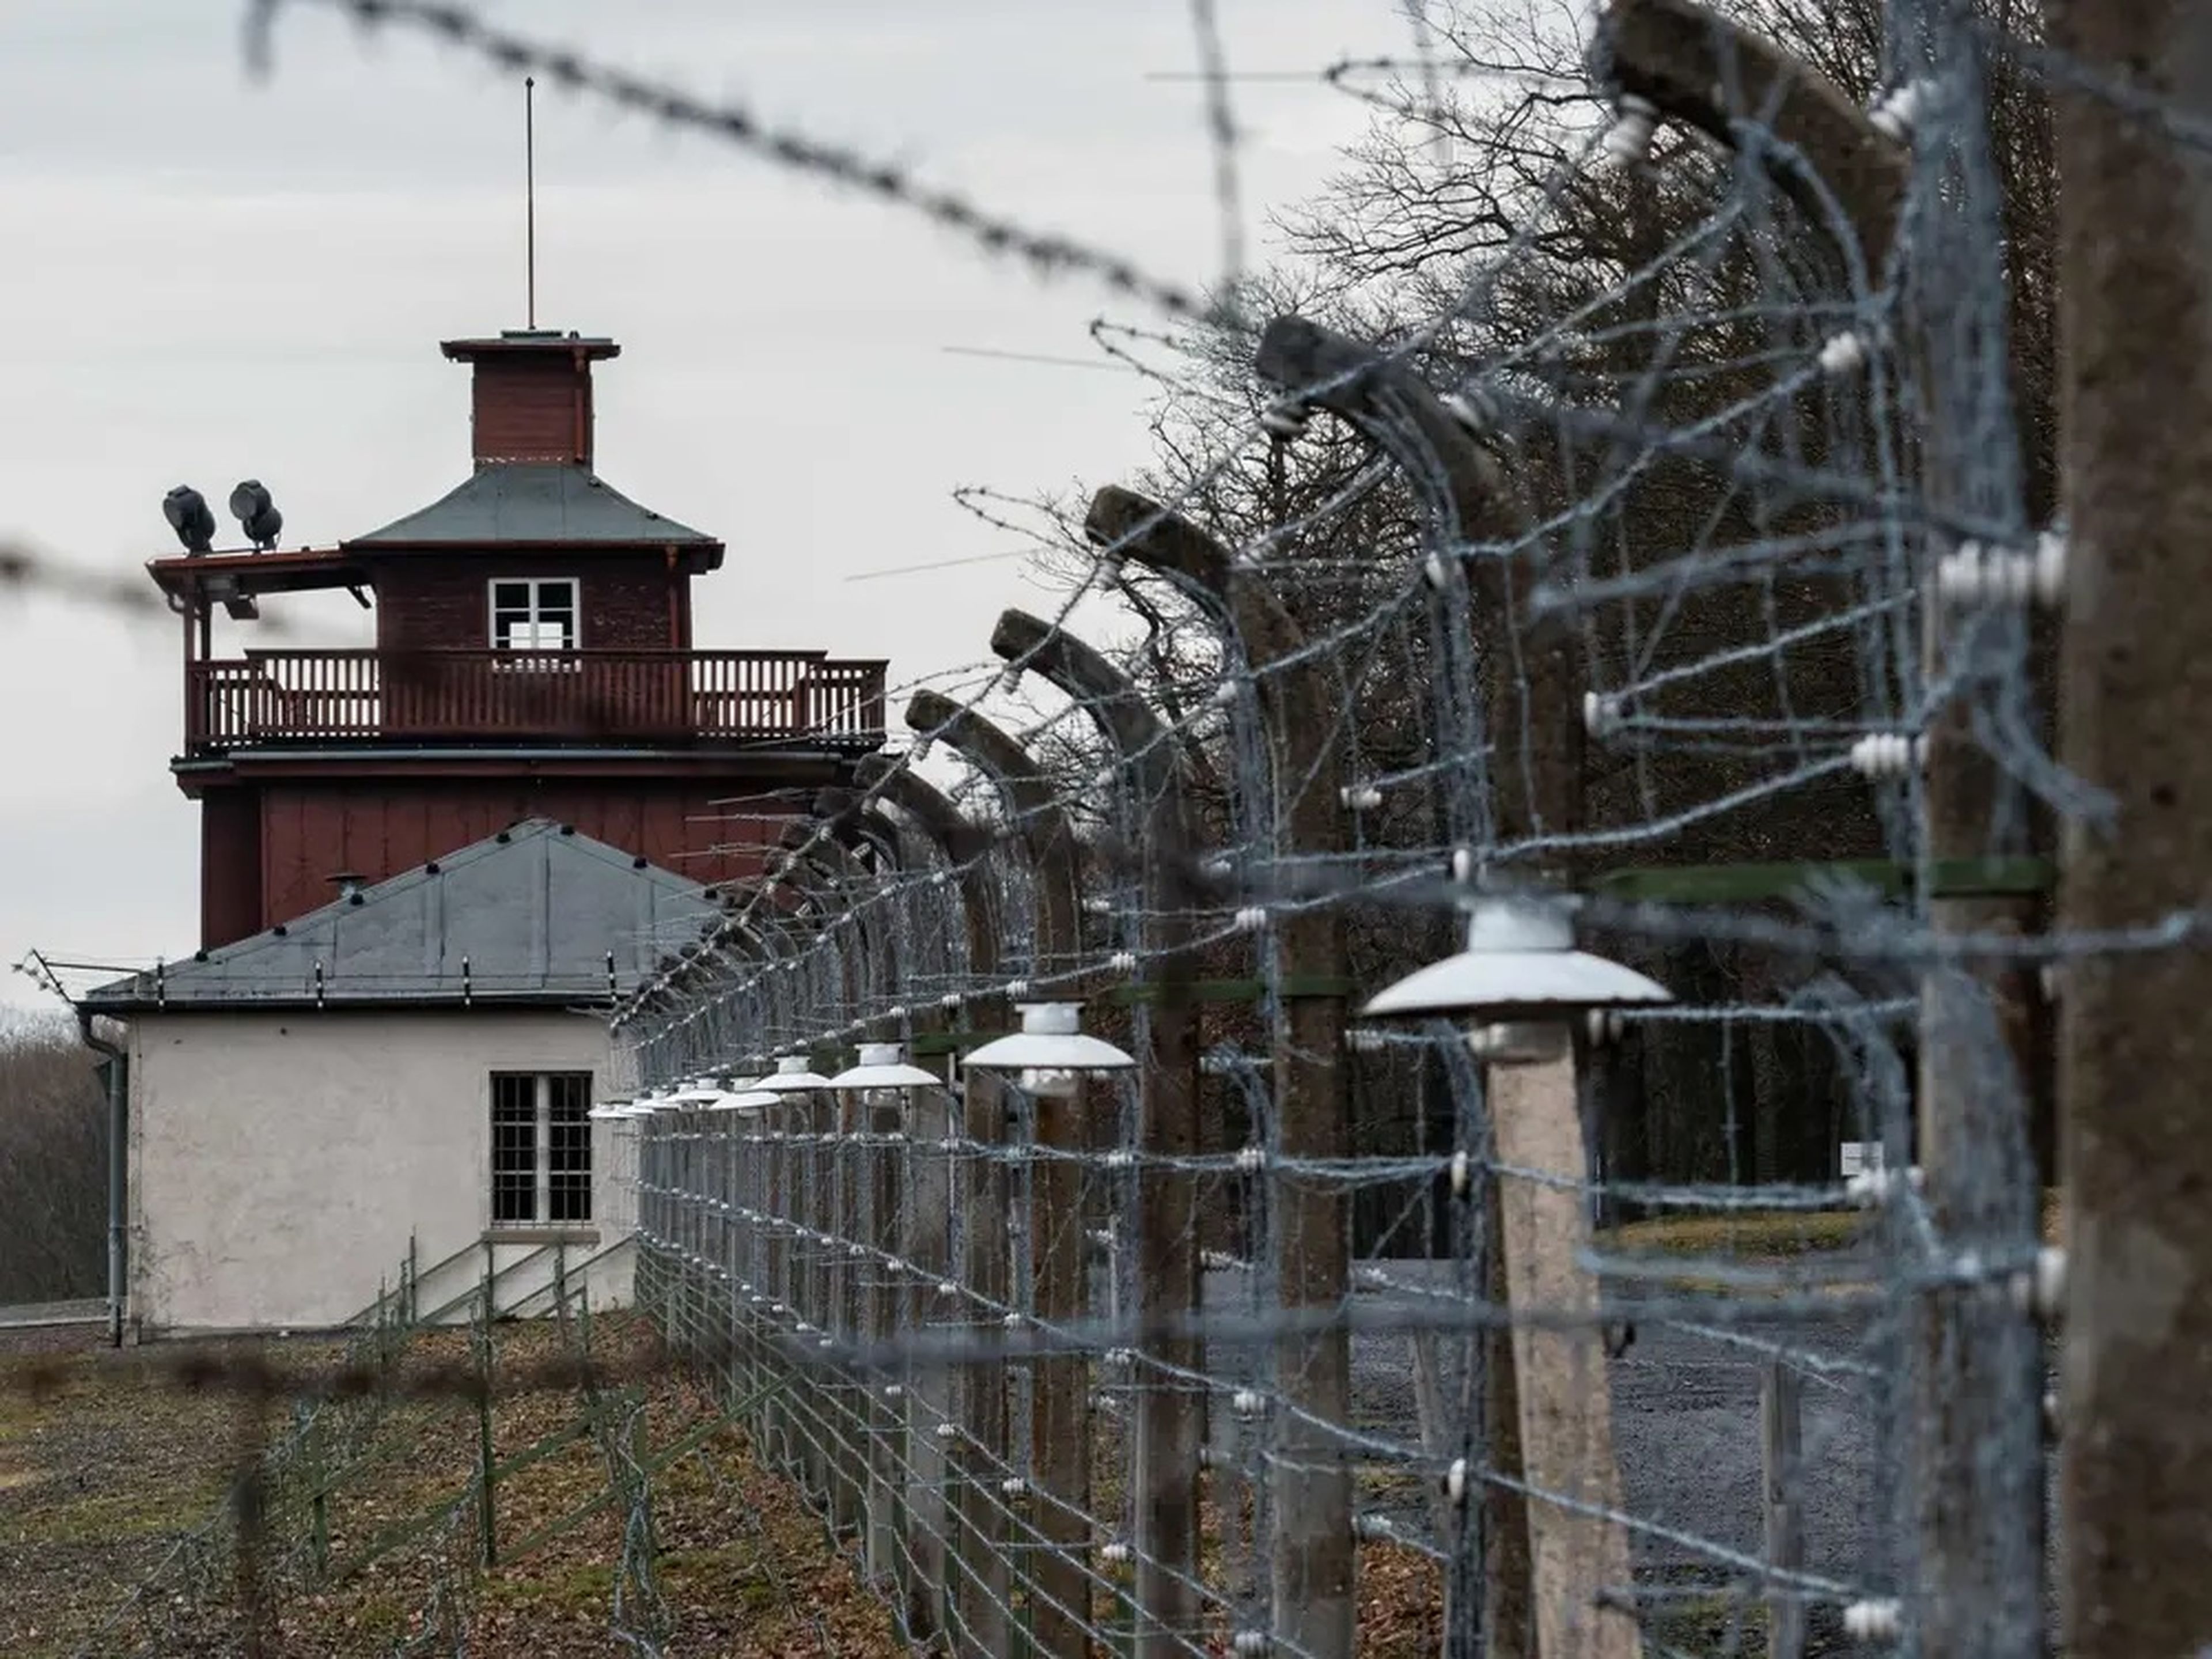 A barbed wire fence encloses the memorial site of Buchenwald near Wiemar, Germany, on January 27, 2020.